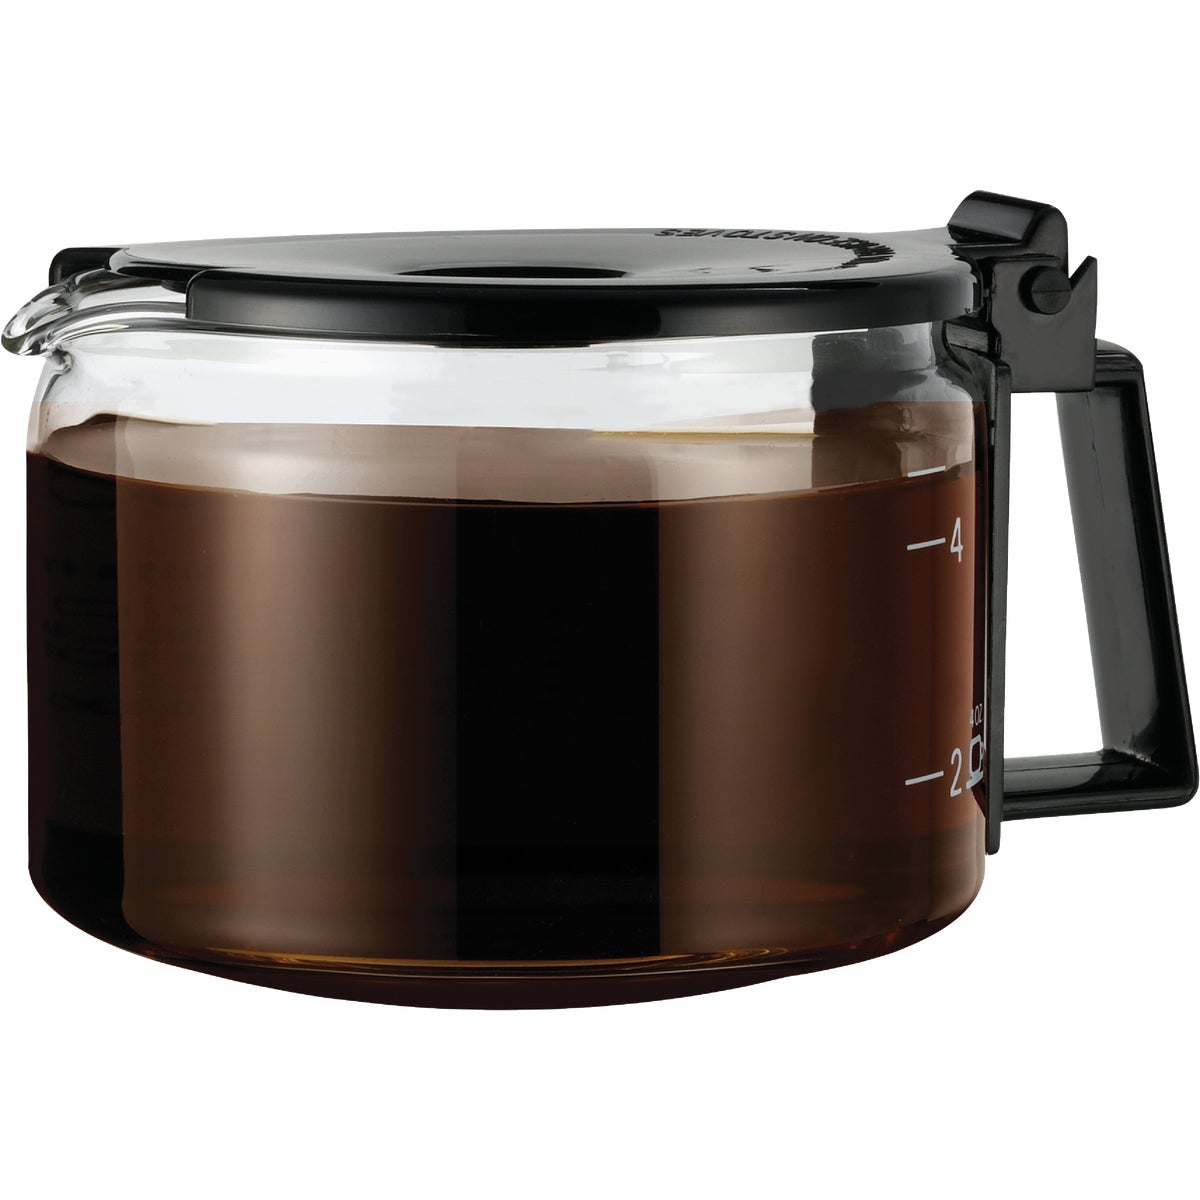 Item 650968, Universal design fits many 5-Cup Coffee Makers including Pause and Serve 